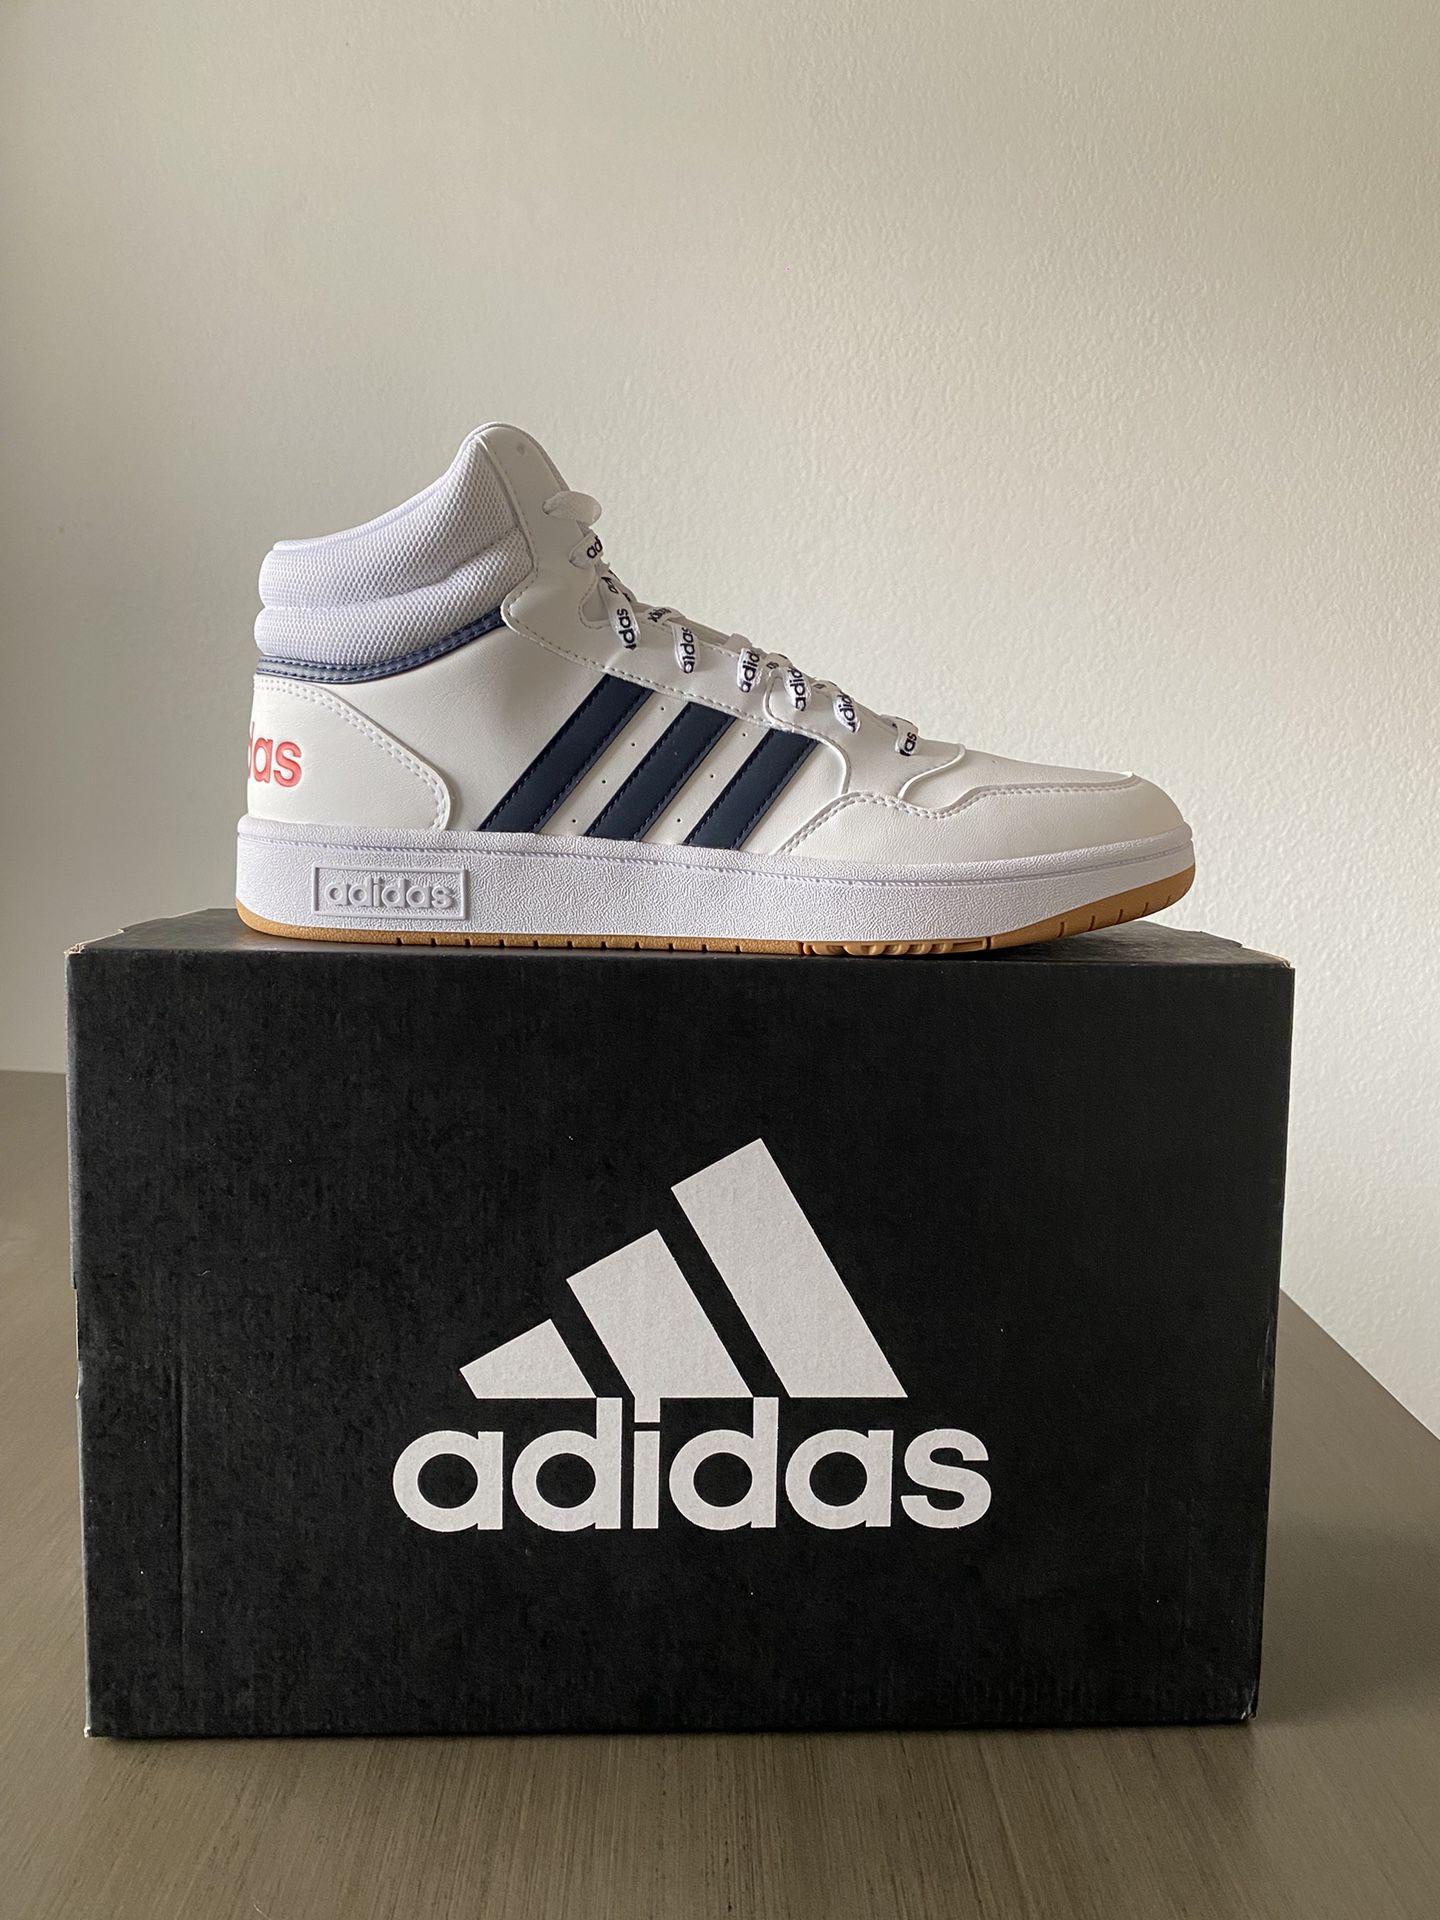 Men's Adidas High-Top Shoes / High Sizes Available: 10, 11 Colors on shoe: White, Navy Blue, Red Includes all-white laces Brand New, Never for Sale in Citrus Heights, CA - OfferUp